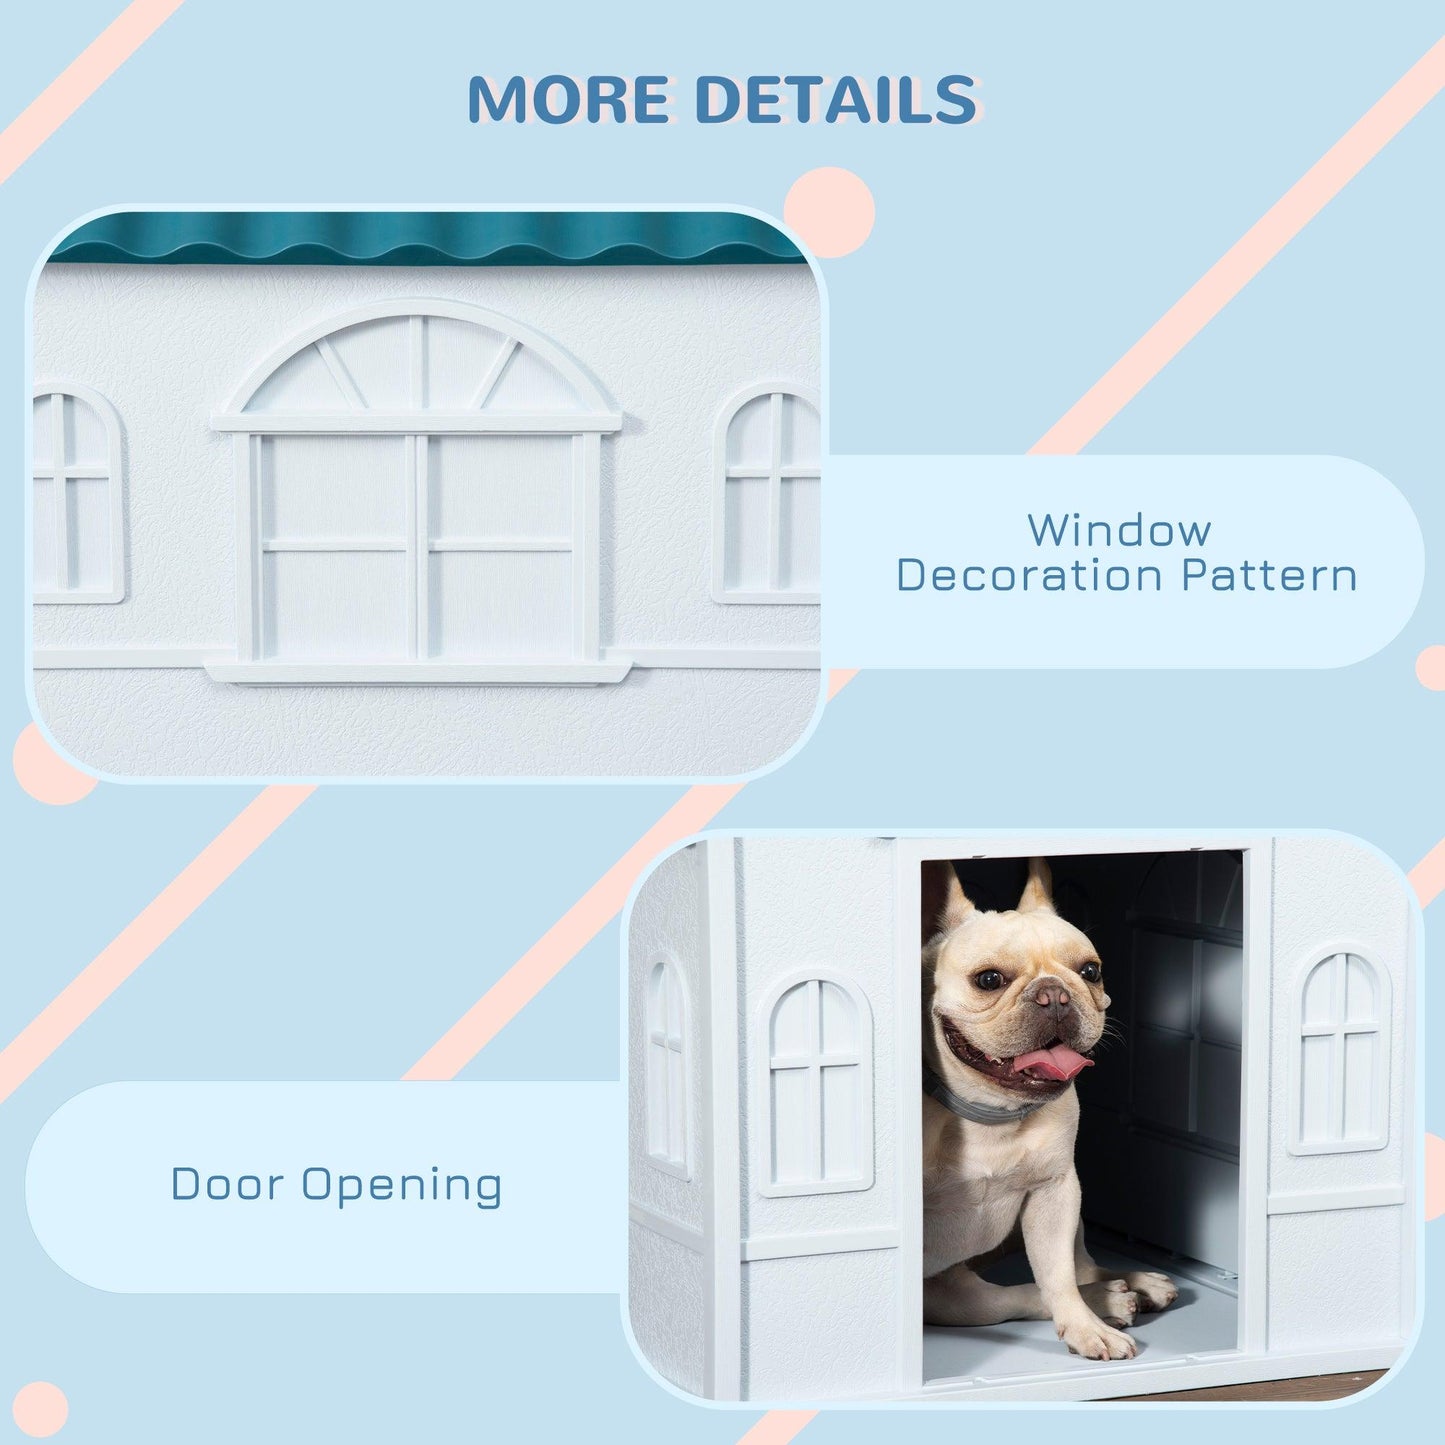 PawHut Weather-Resistant Dog House, Puppy Shelter for Medium Dogs - Blue - ALL4U RETAILER LTD